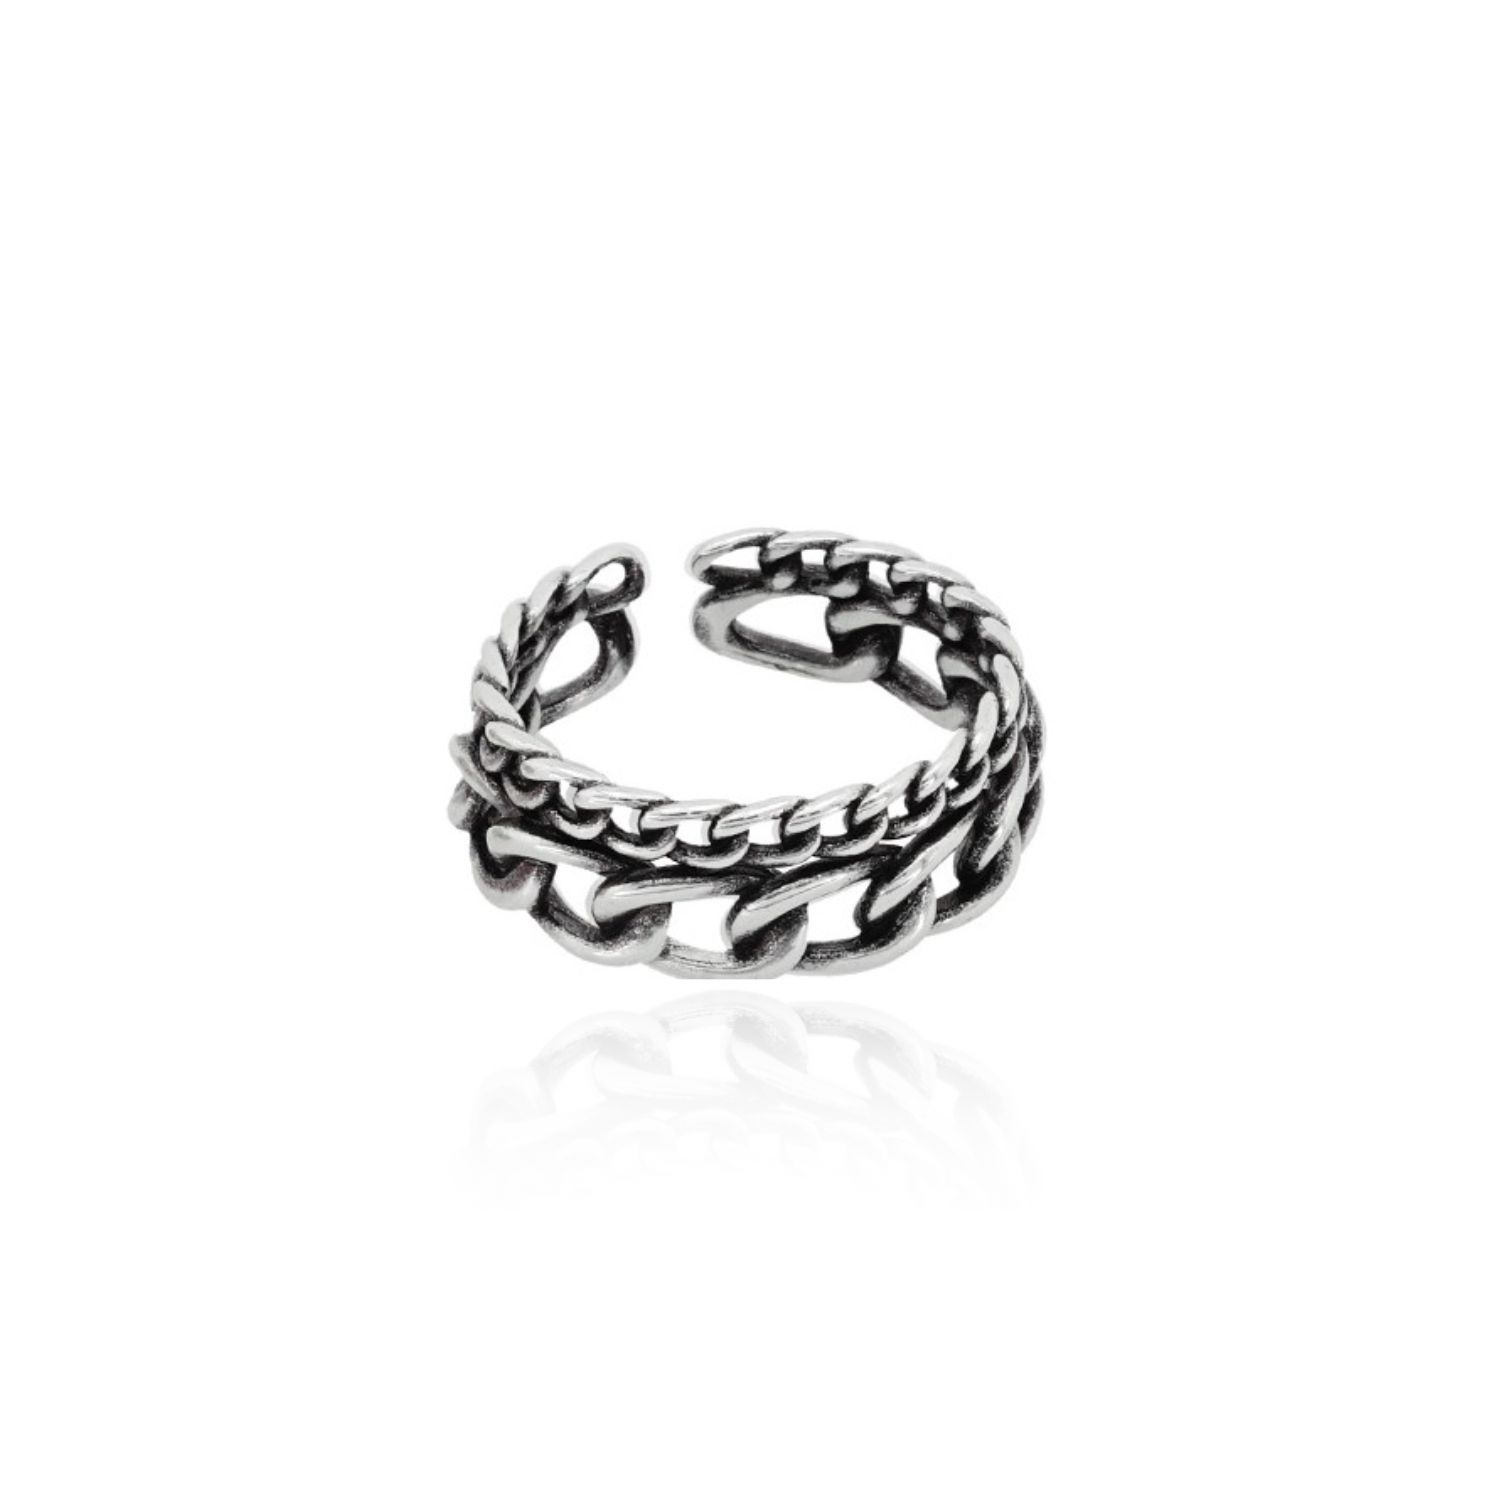 An all-time classic trend, but this time, made for your fingers. The double curb chain ring is designed with two strands of curb chains, facing each other, one smaller and the other larger. This trendy accessory is crafted from 24k gold-plated brass and can add a stylish edge to any outfit. Open torque for a perfect fit.